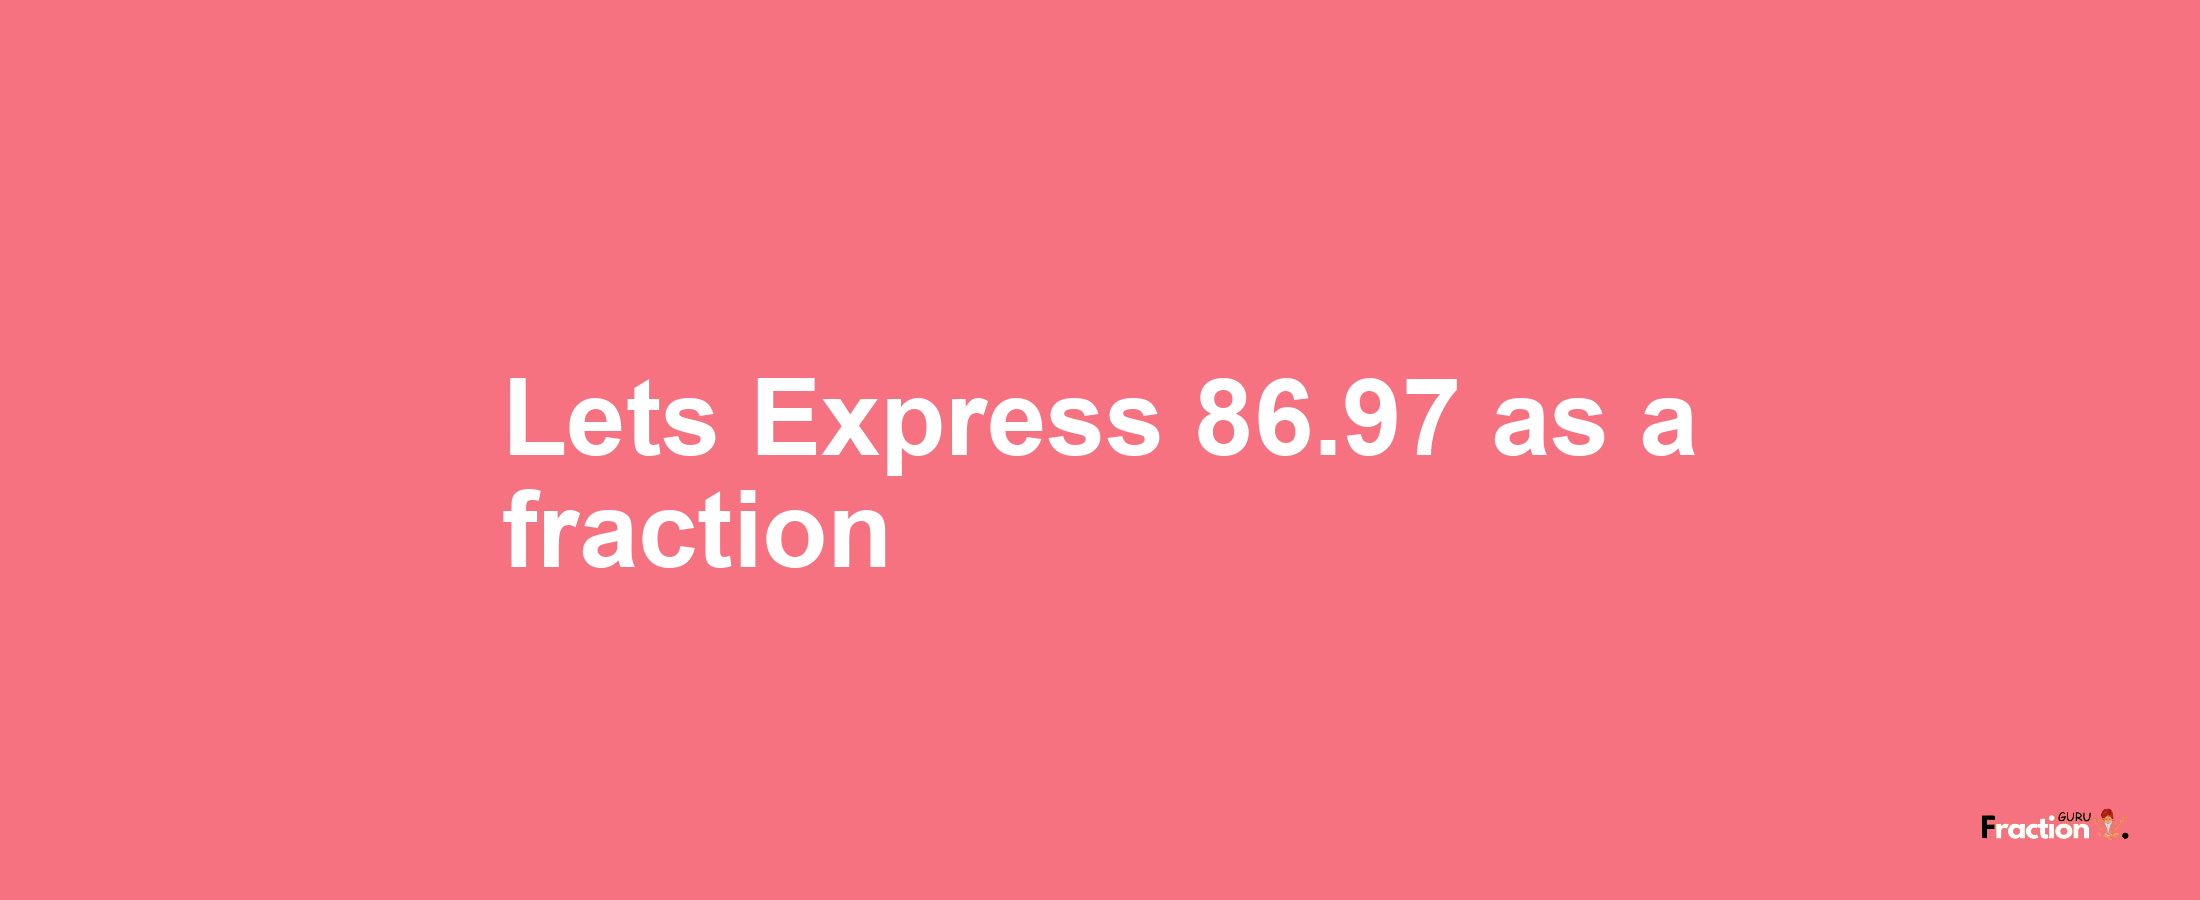 Lets Express 86.97 as afraction